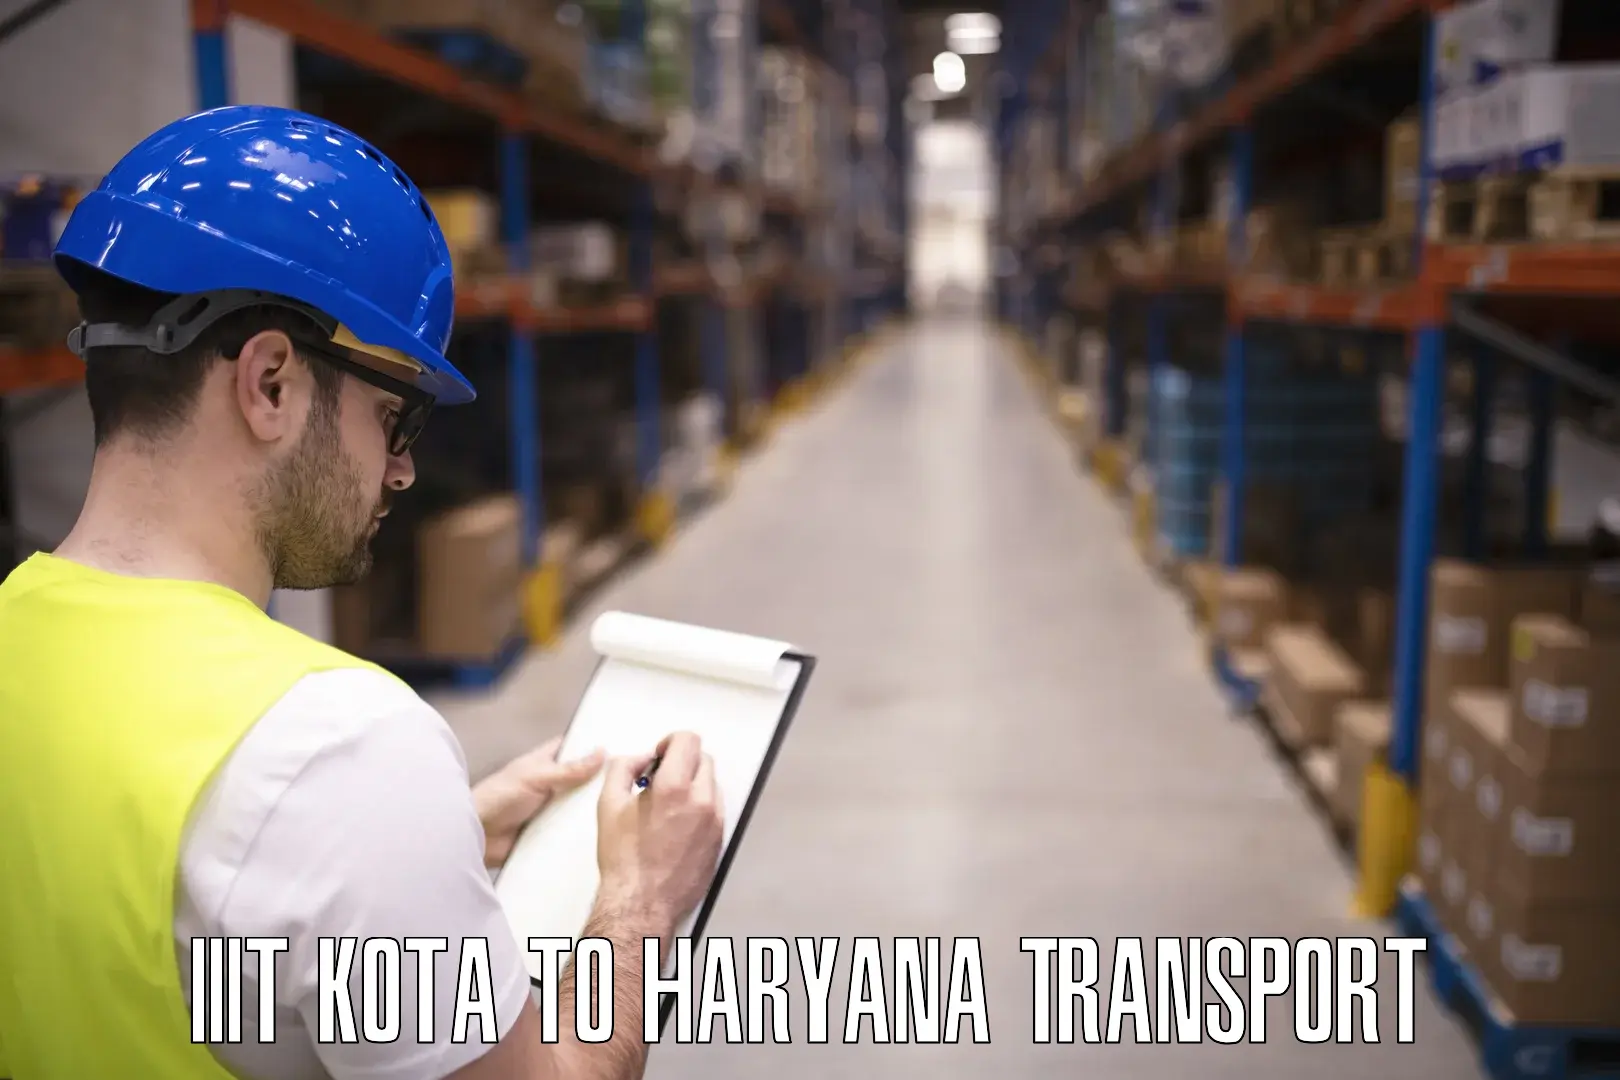 Air freight transport services IIIT Kota to NCR Haryana